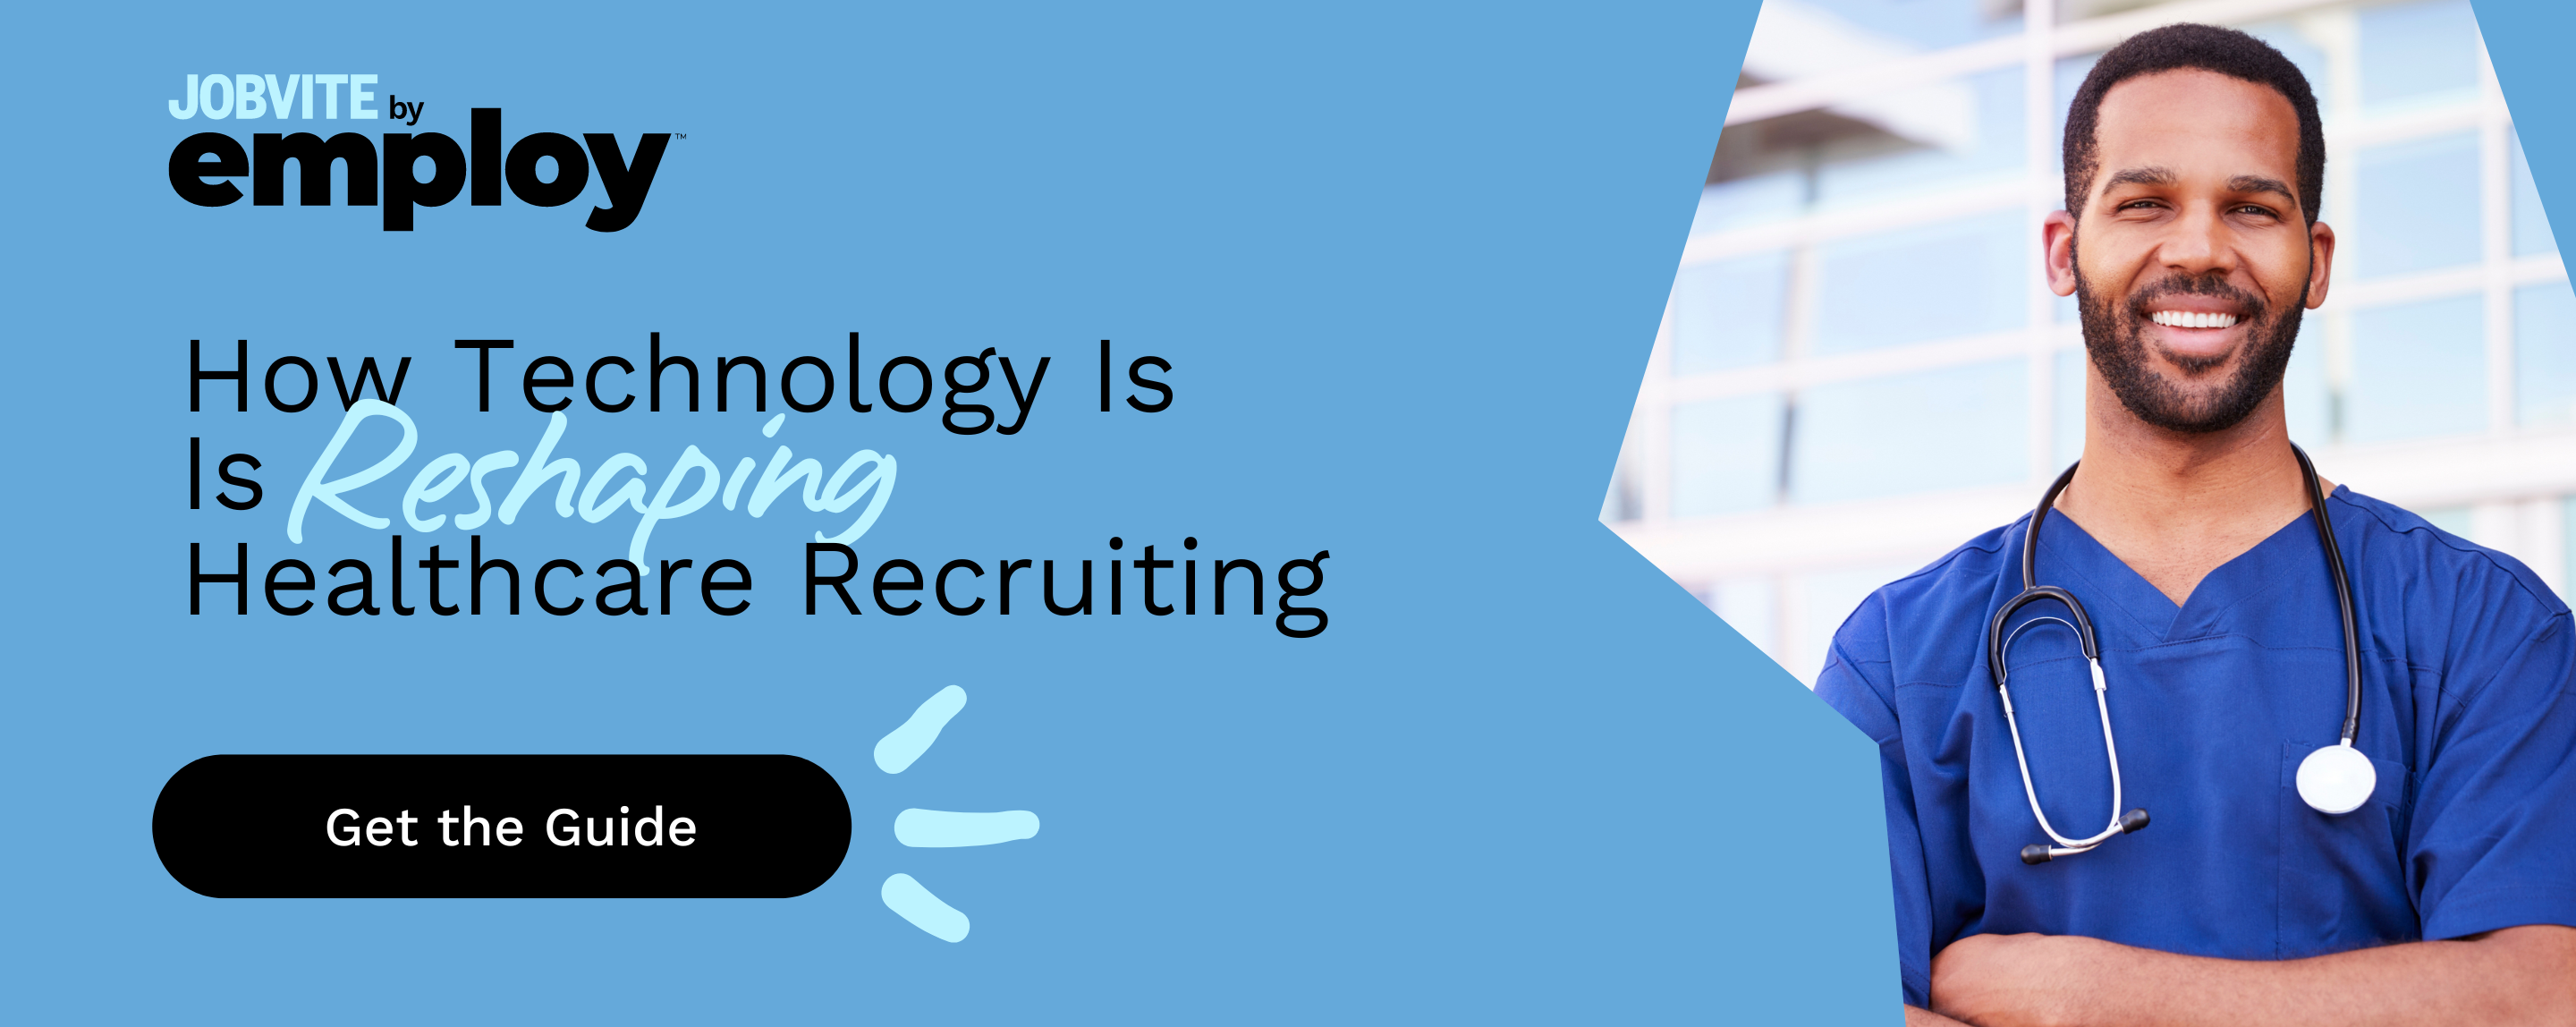 Get the Jobvite Healthcare Recruiting Guide